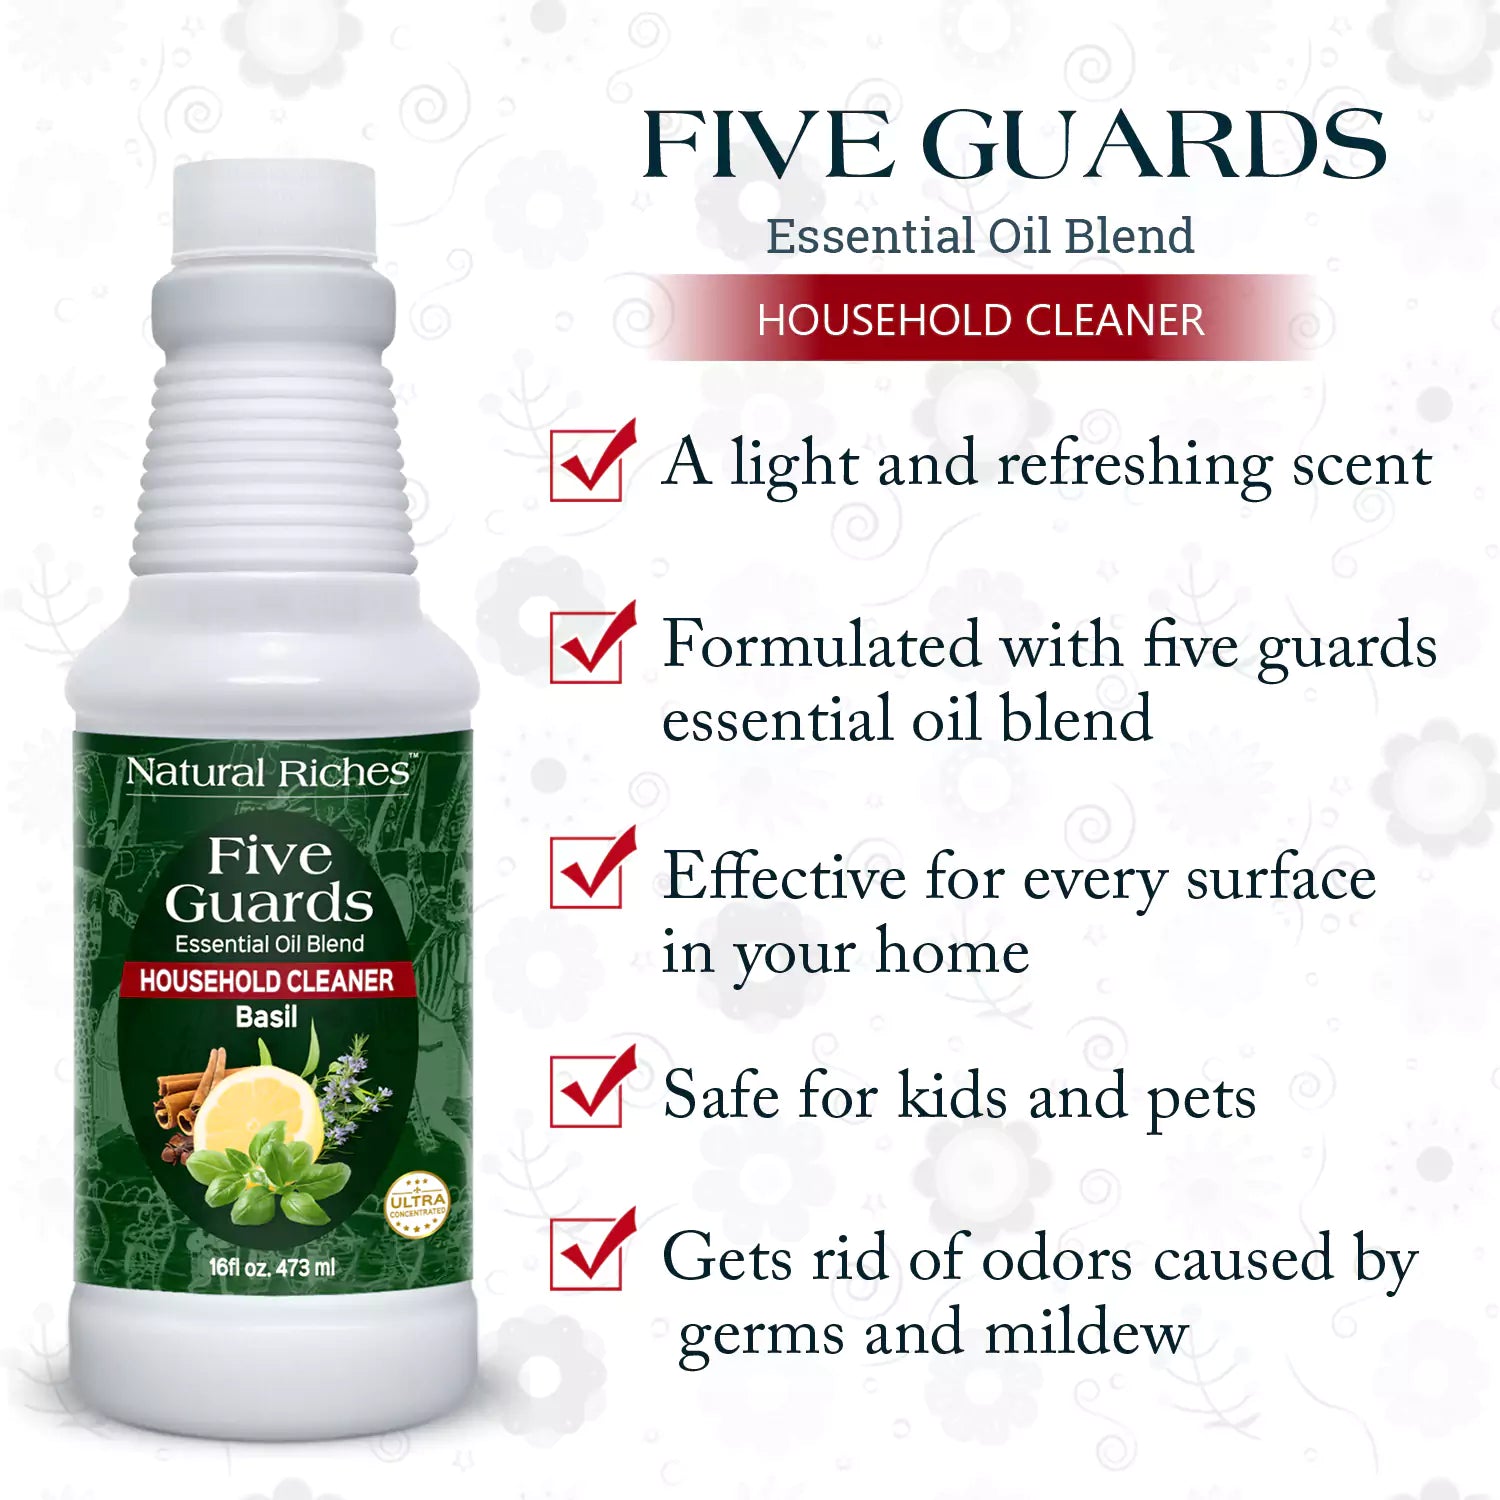 Five Guards Household Cleaner with Basil